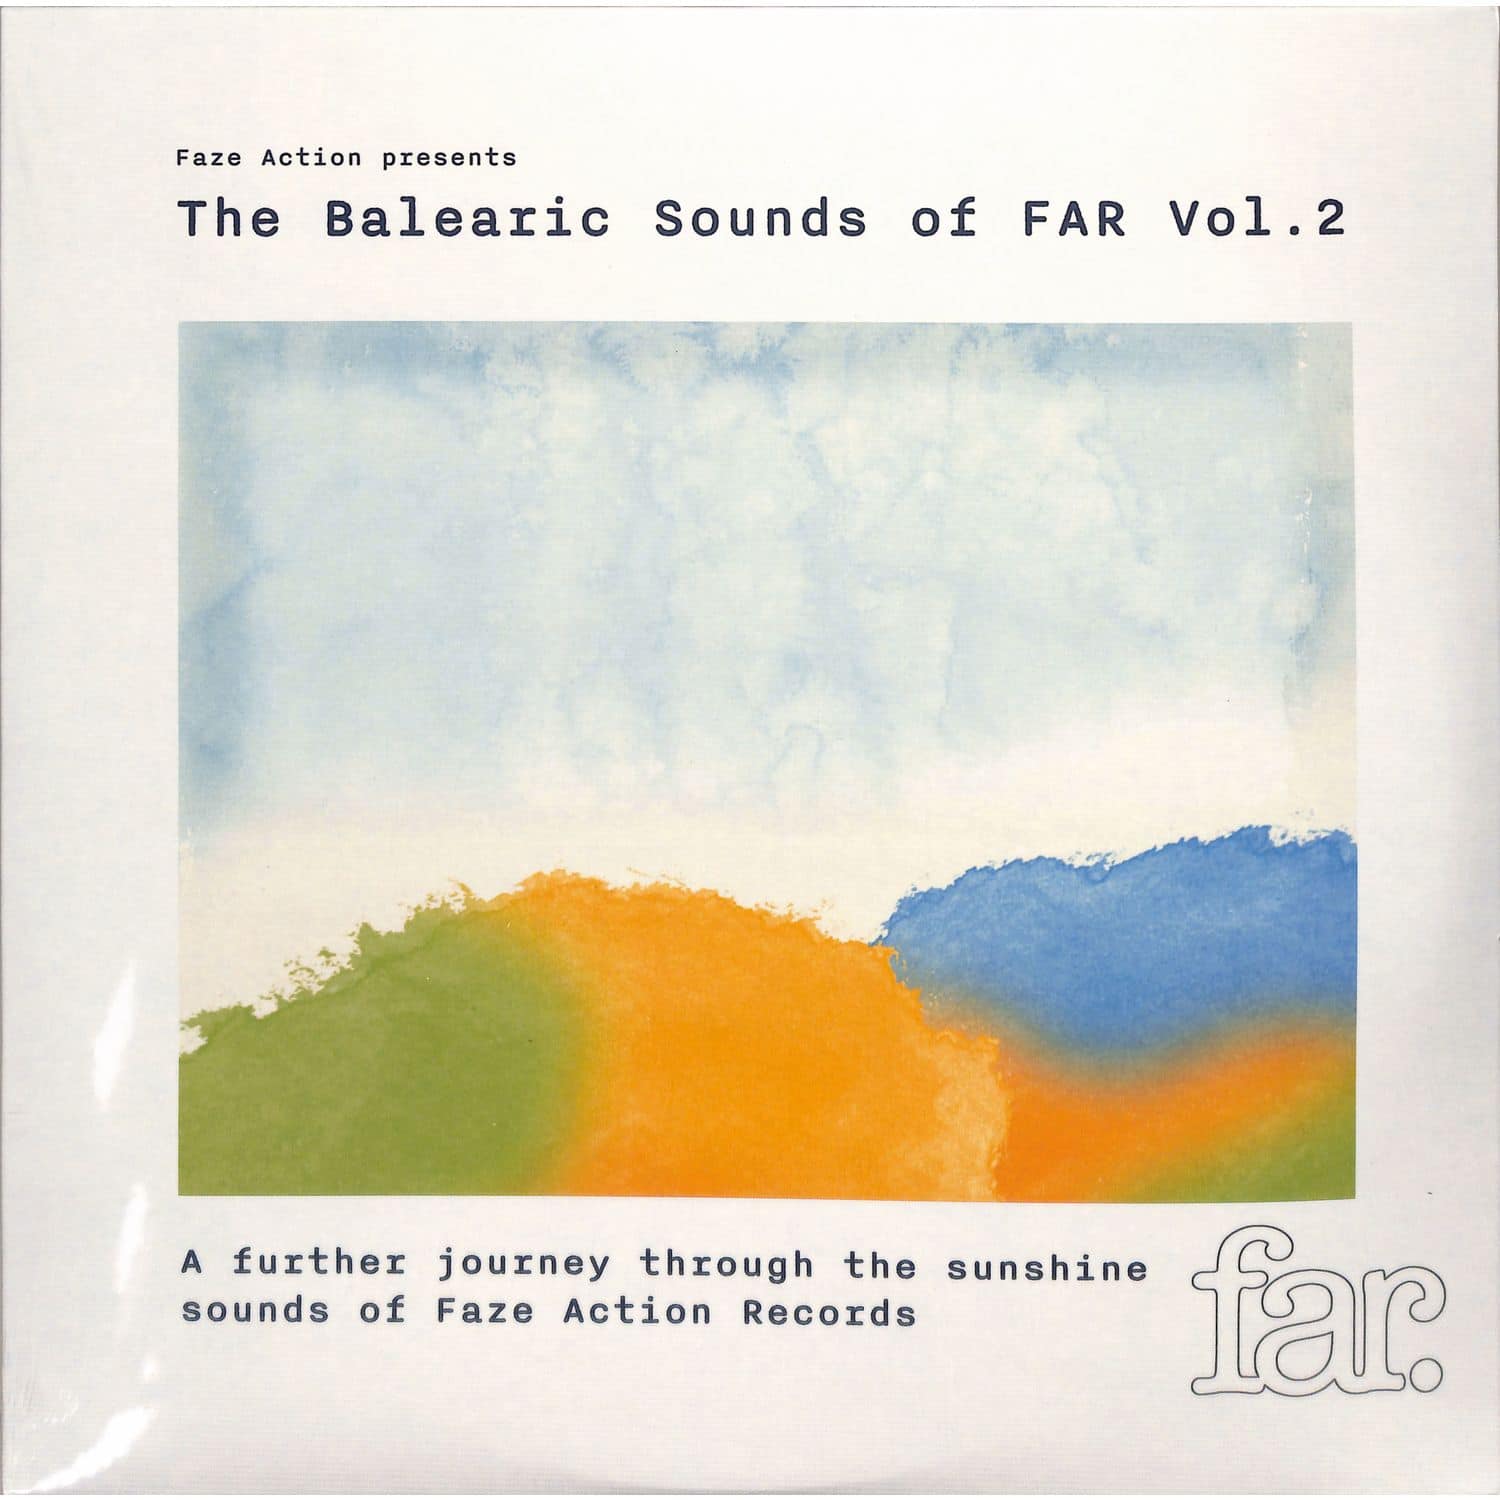 Faze Action - PRESENTS THE BALEARIC SOUNDS OF FAR VOL. 2 